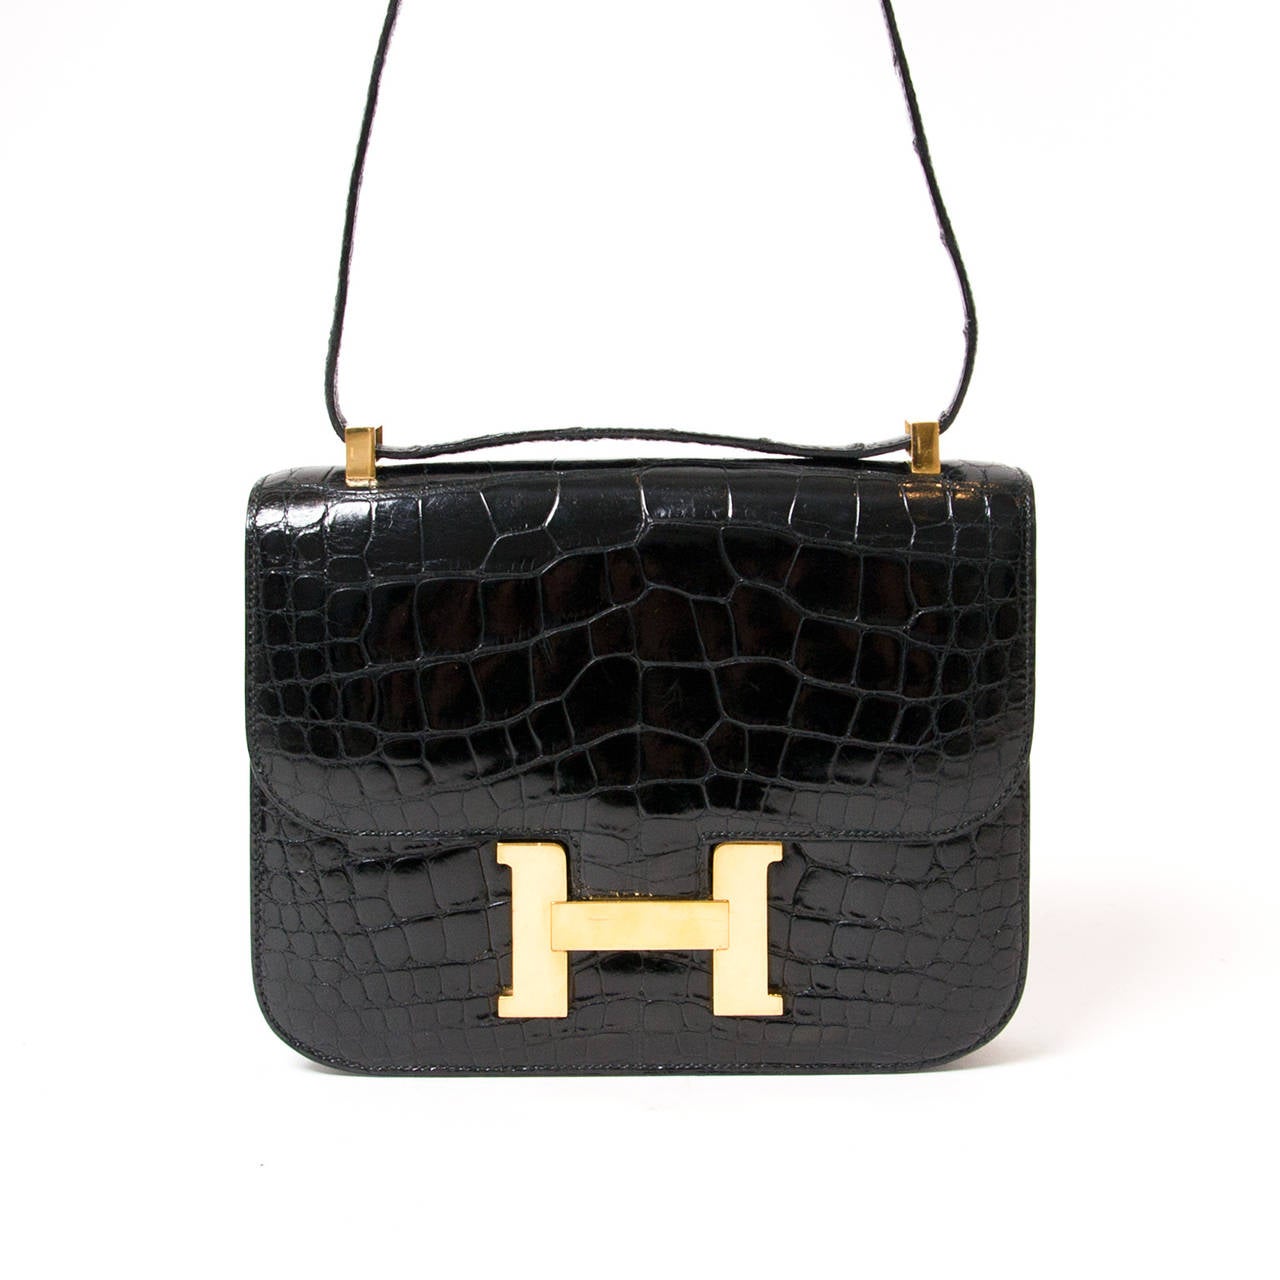 This authentic Hermes Constance bag in buffed alligator hide, is in excellent condition. This alligator version is especially rare due the exotic nature of this particular skin. The Constance has simple clean lines and brings to mind an equestrian